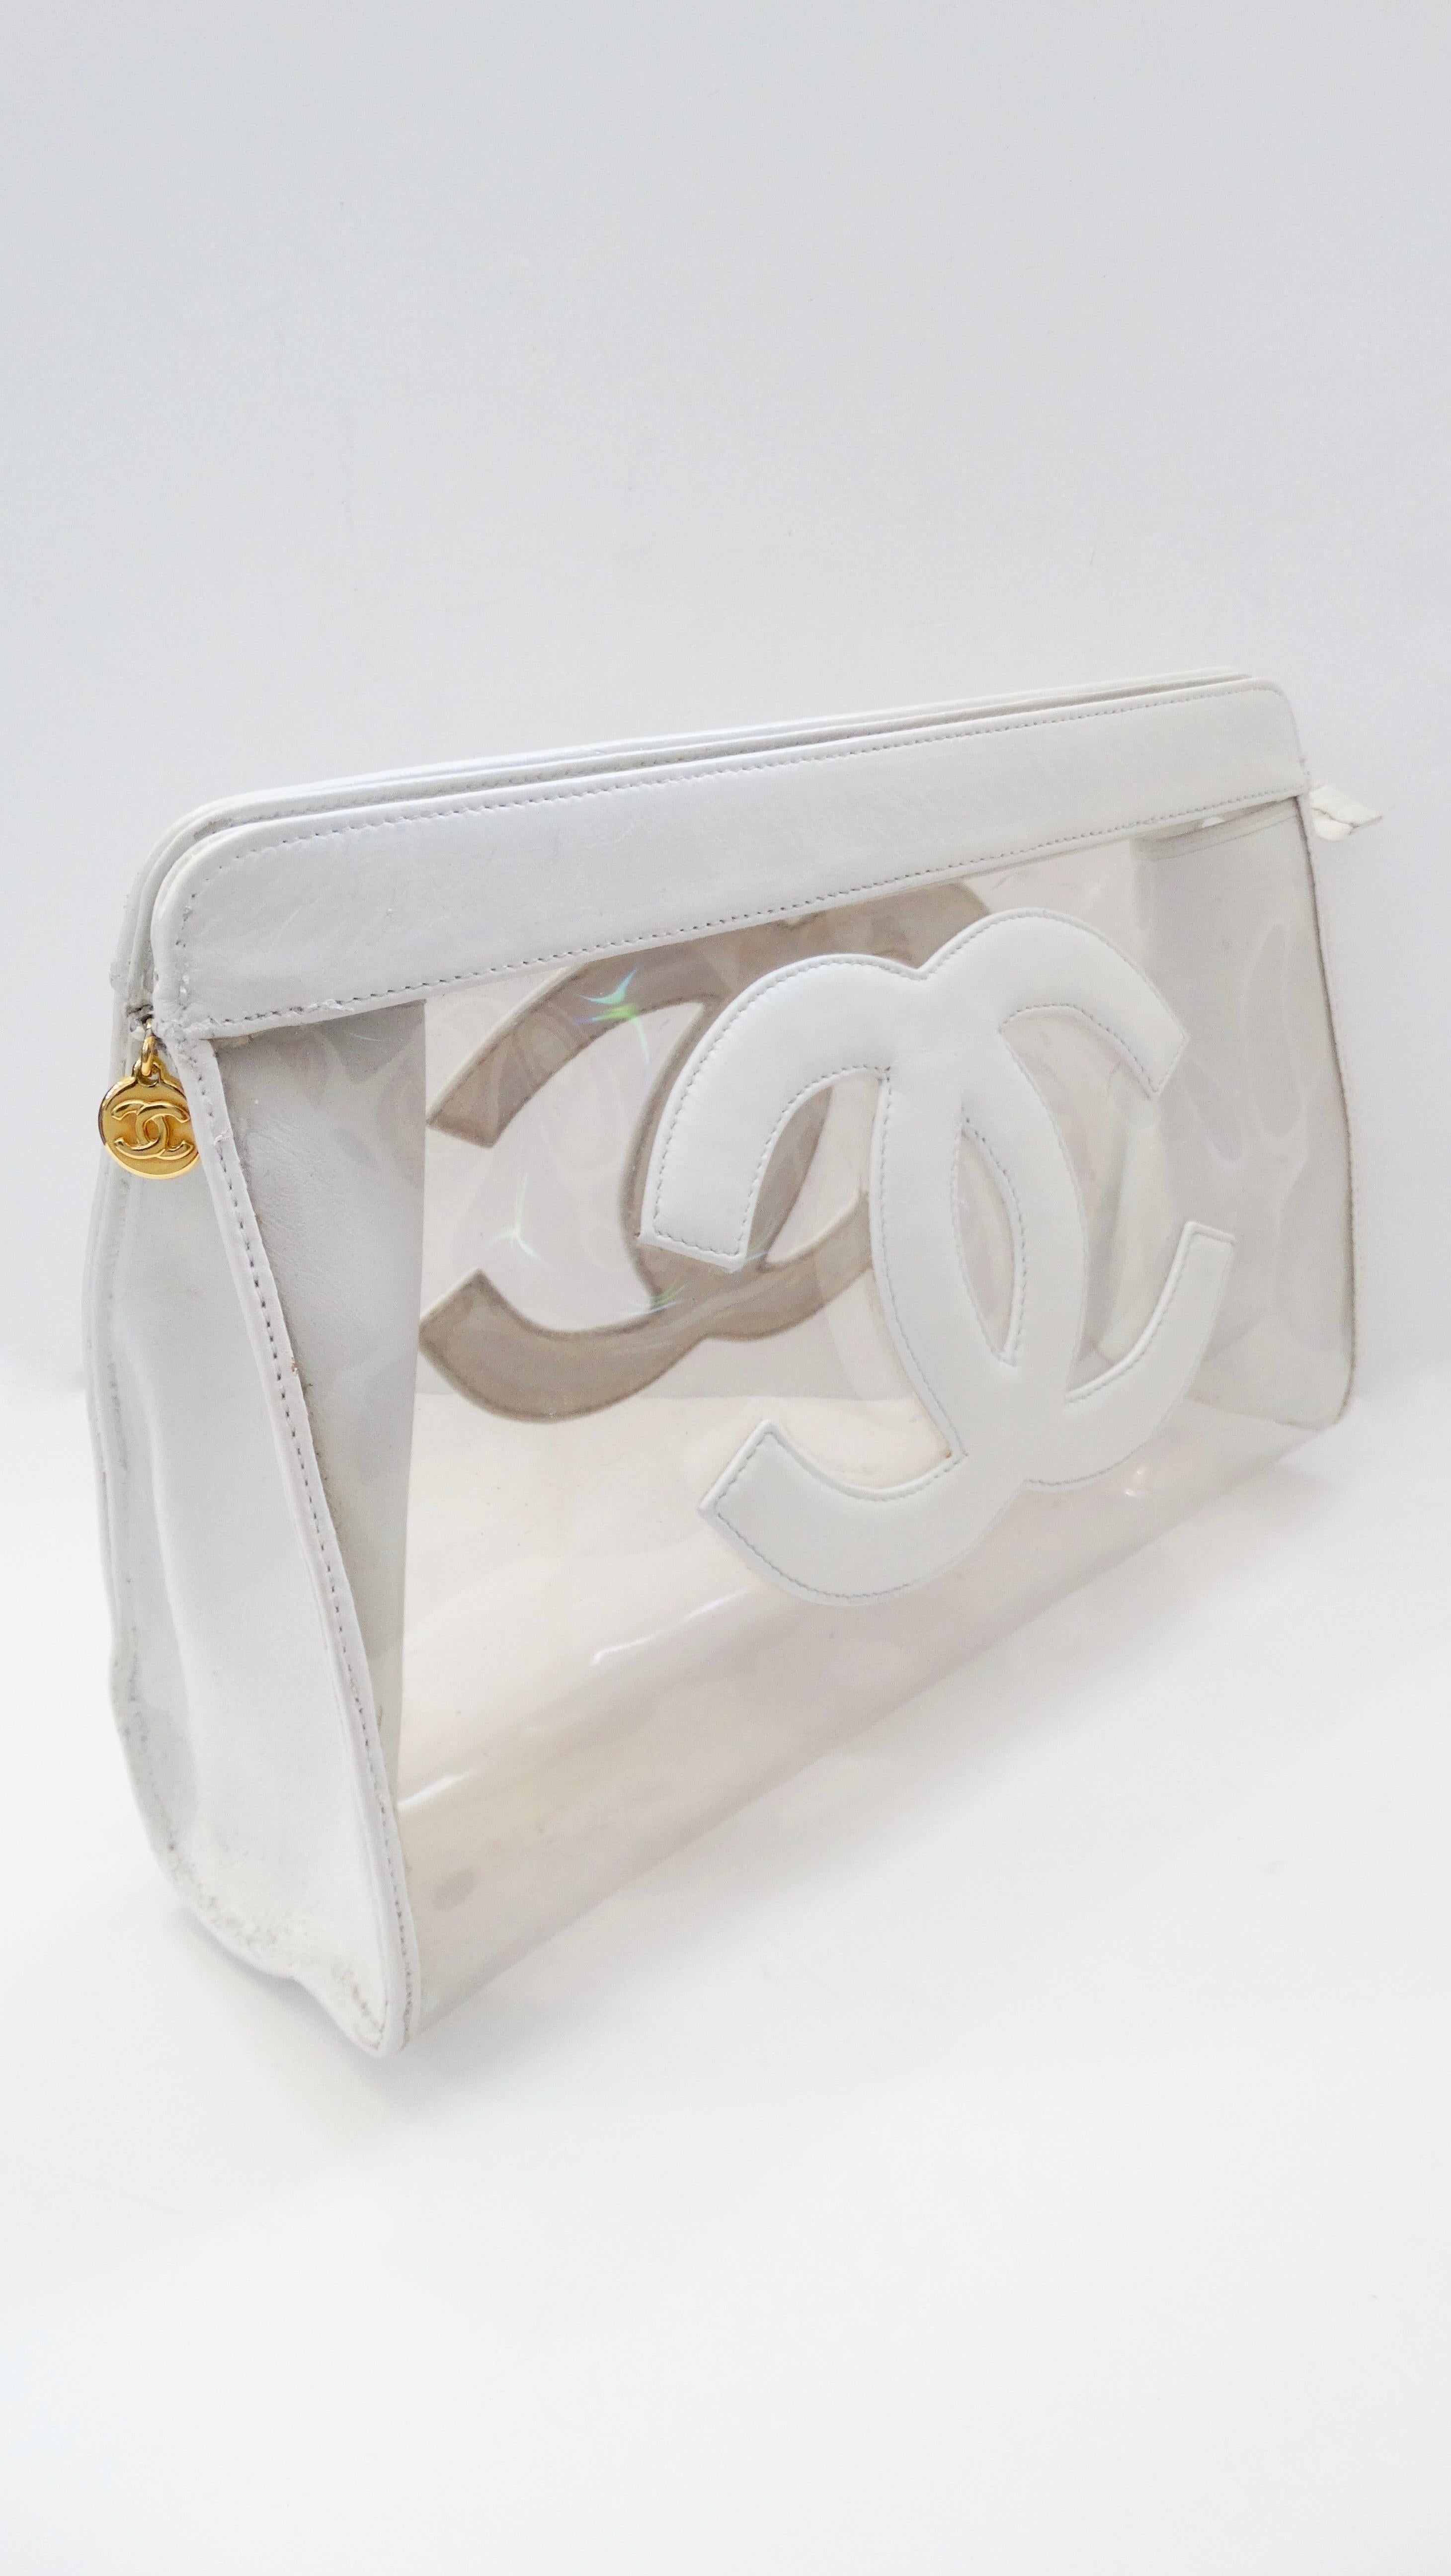 You can't go wrong with a great Chanel clutch! Circa 1990s, this clear PVC clutch features a white leather trim and the iconic Chanel CC on the front and back face. Includes a tonal white top zipper with a gold plated CC embossed charm. The perfect